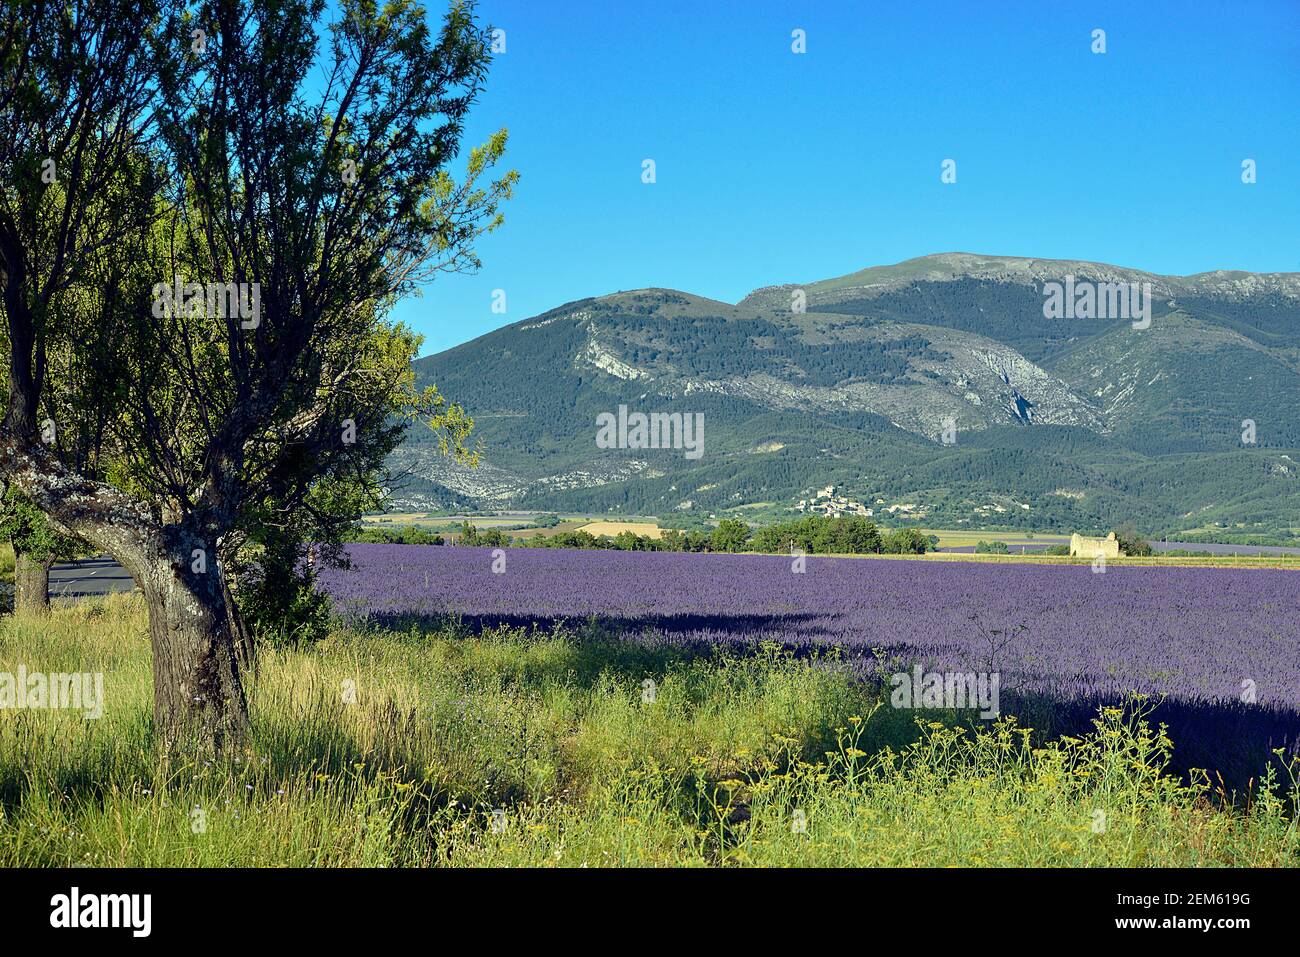 Valensol High Resolution Stock Photography and Images - Alamy